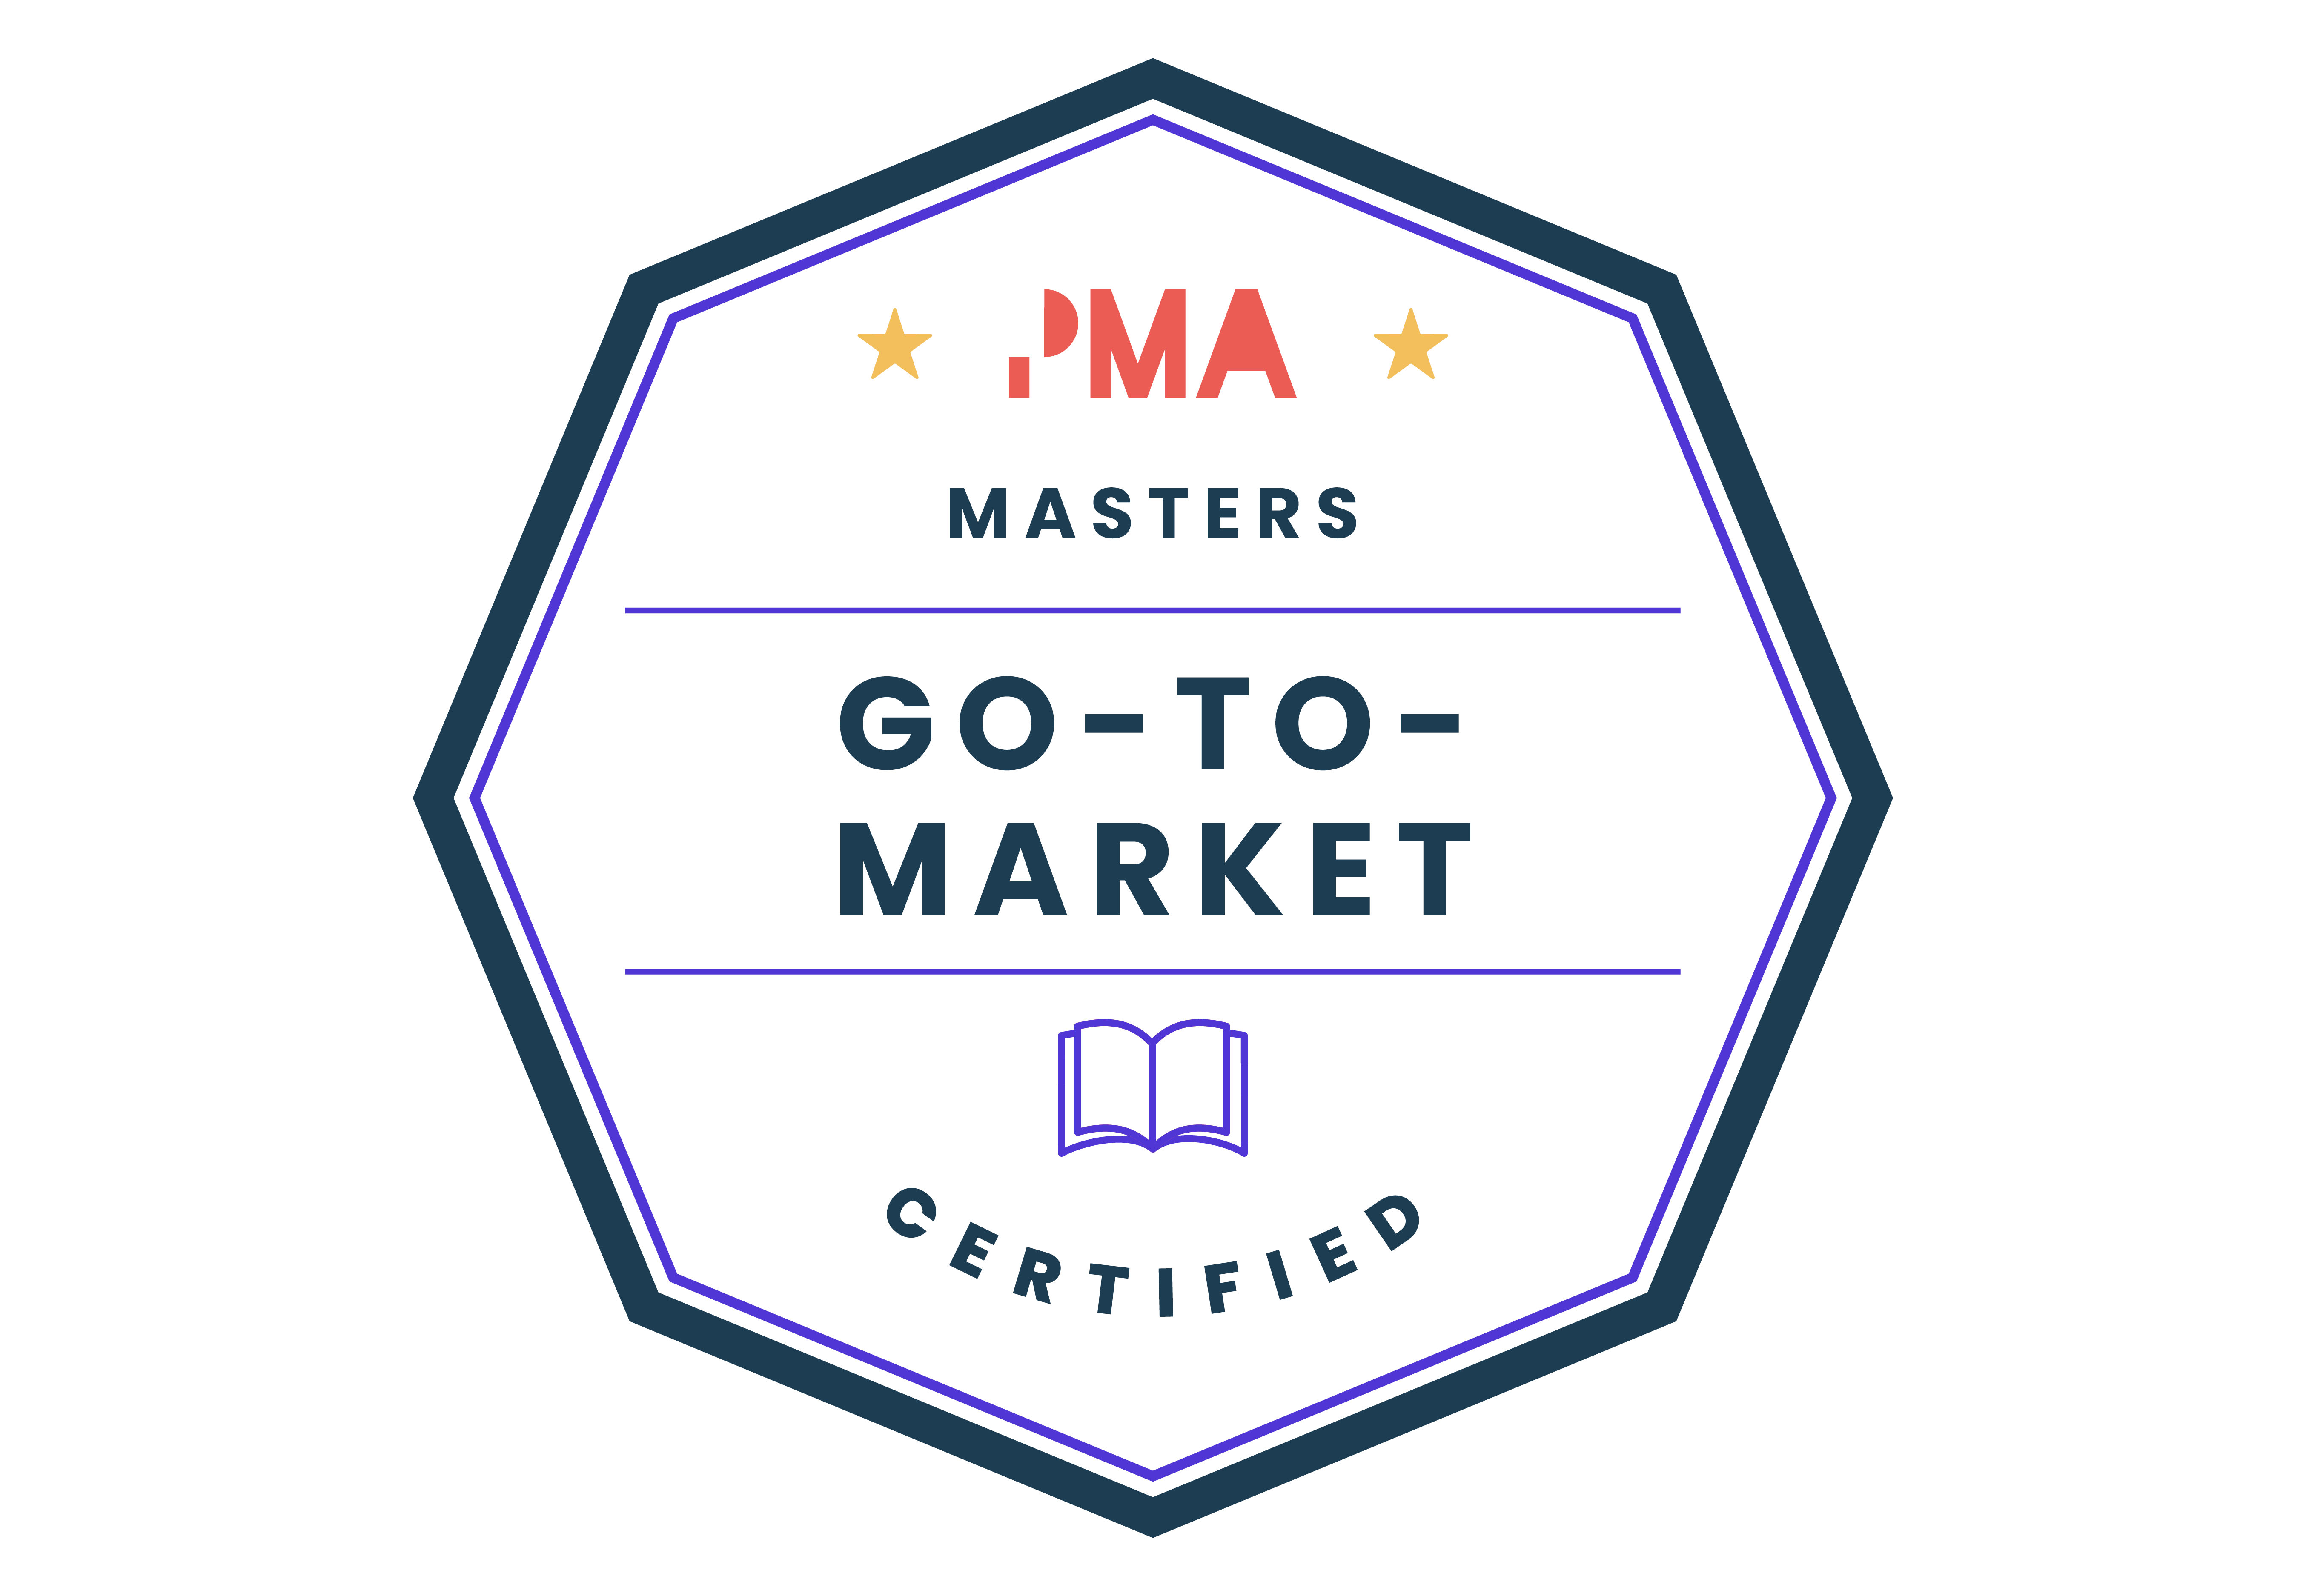 Go-to-Market Certified | Masters badge